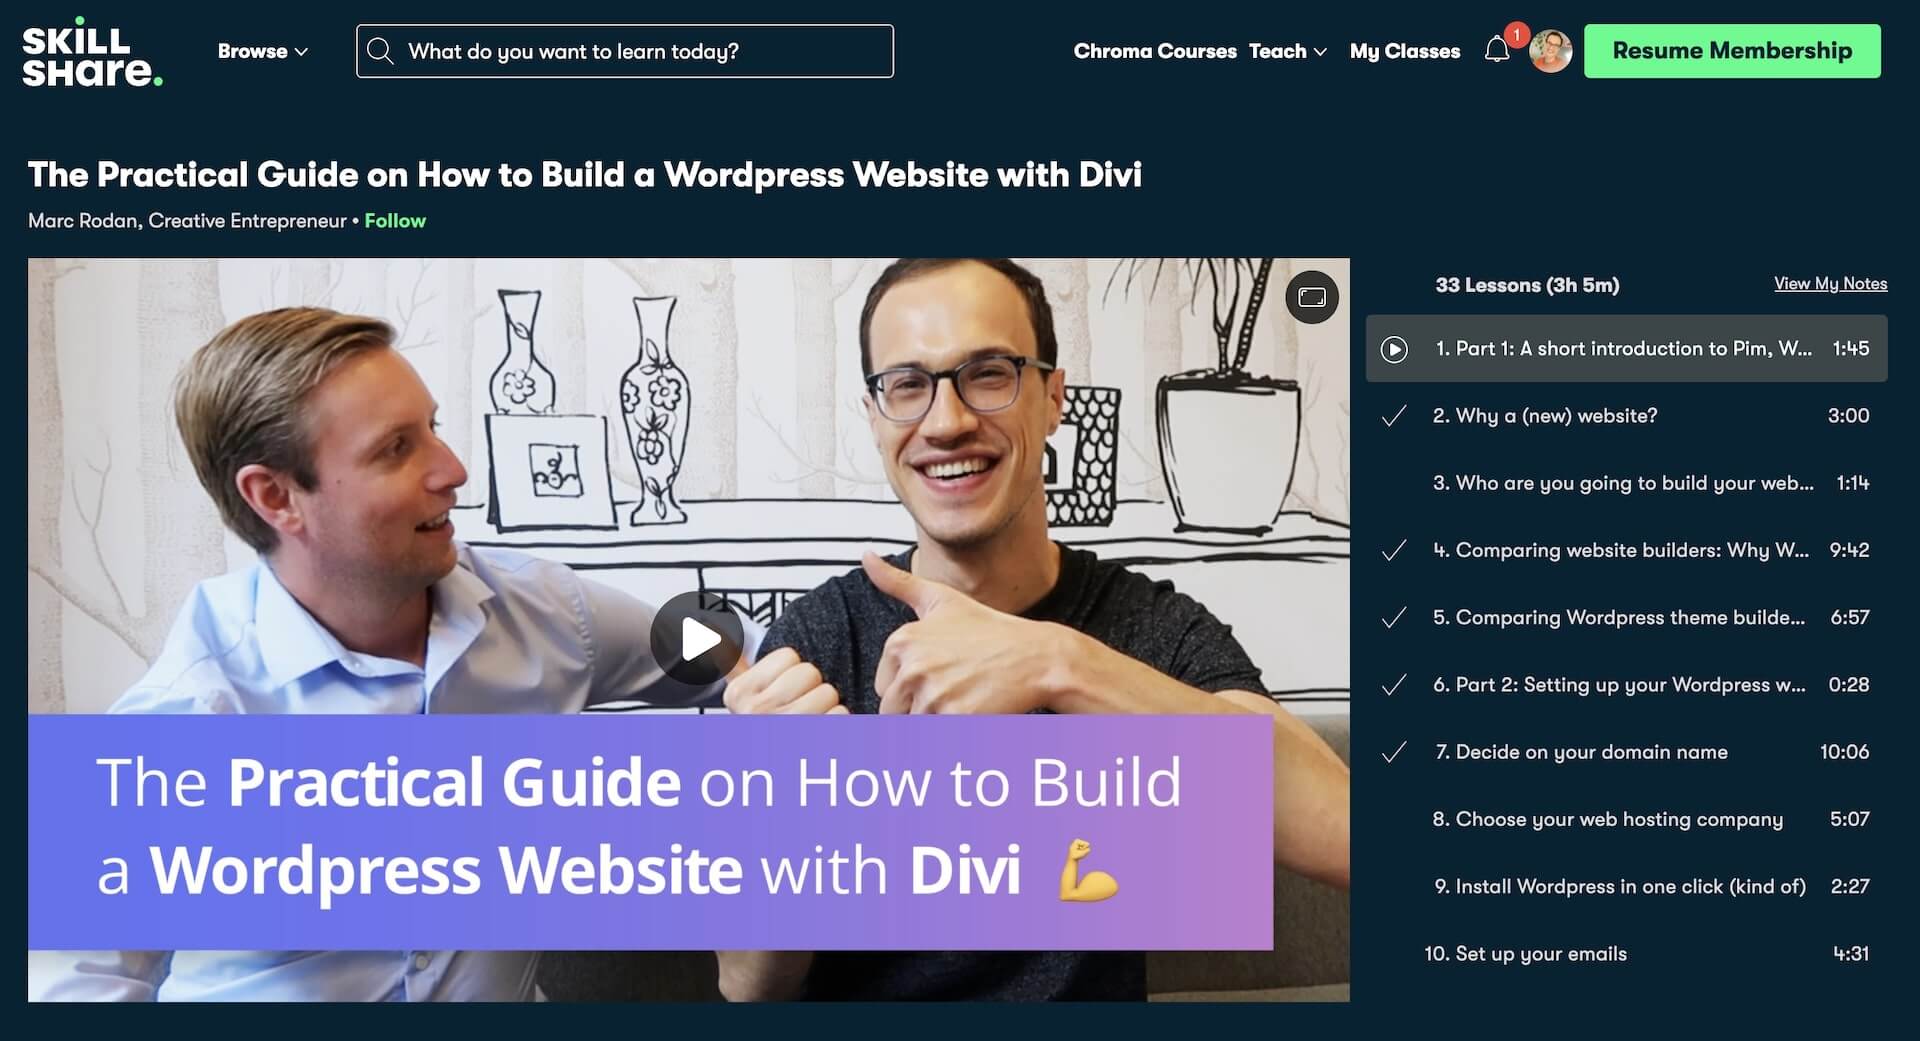 The Practical Guide on How to Build a WordPress Website with Divi pim marc rodan skillshare (1)